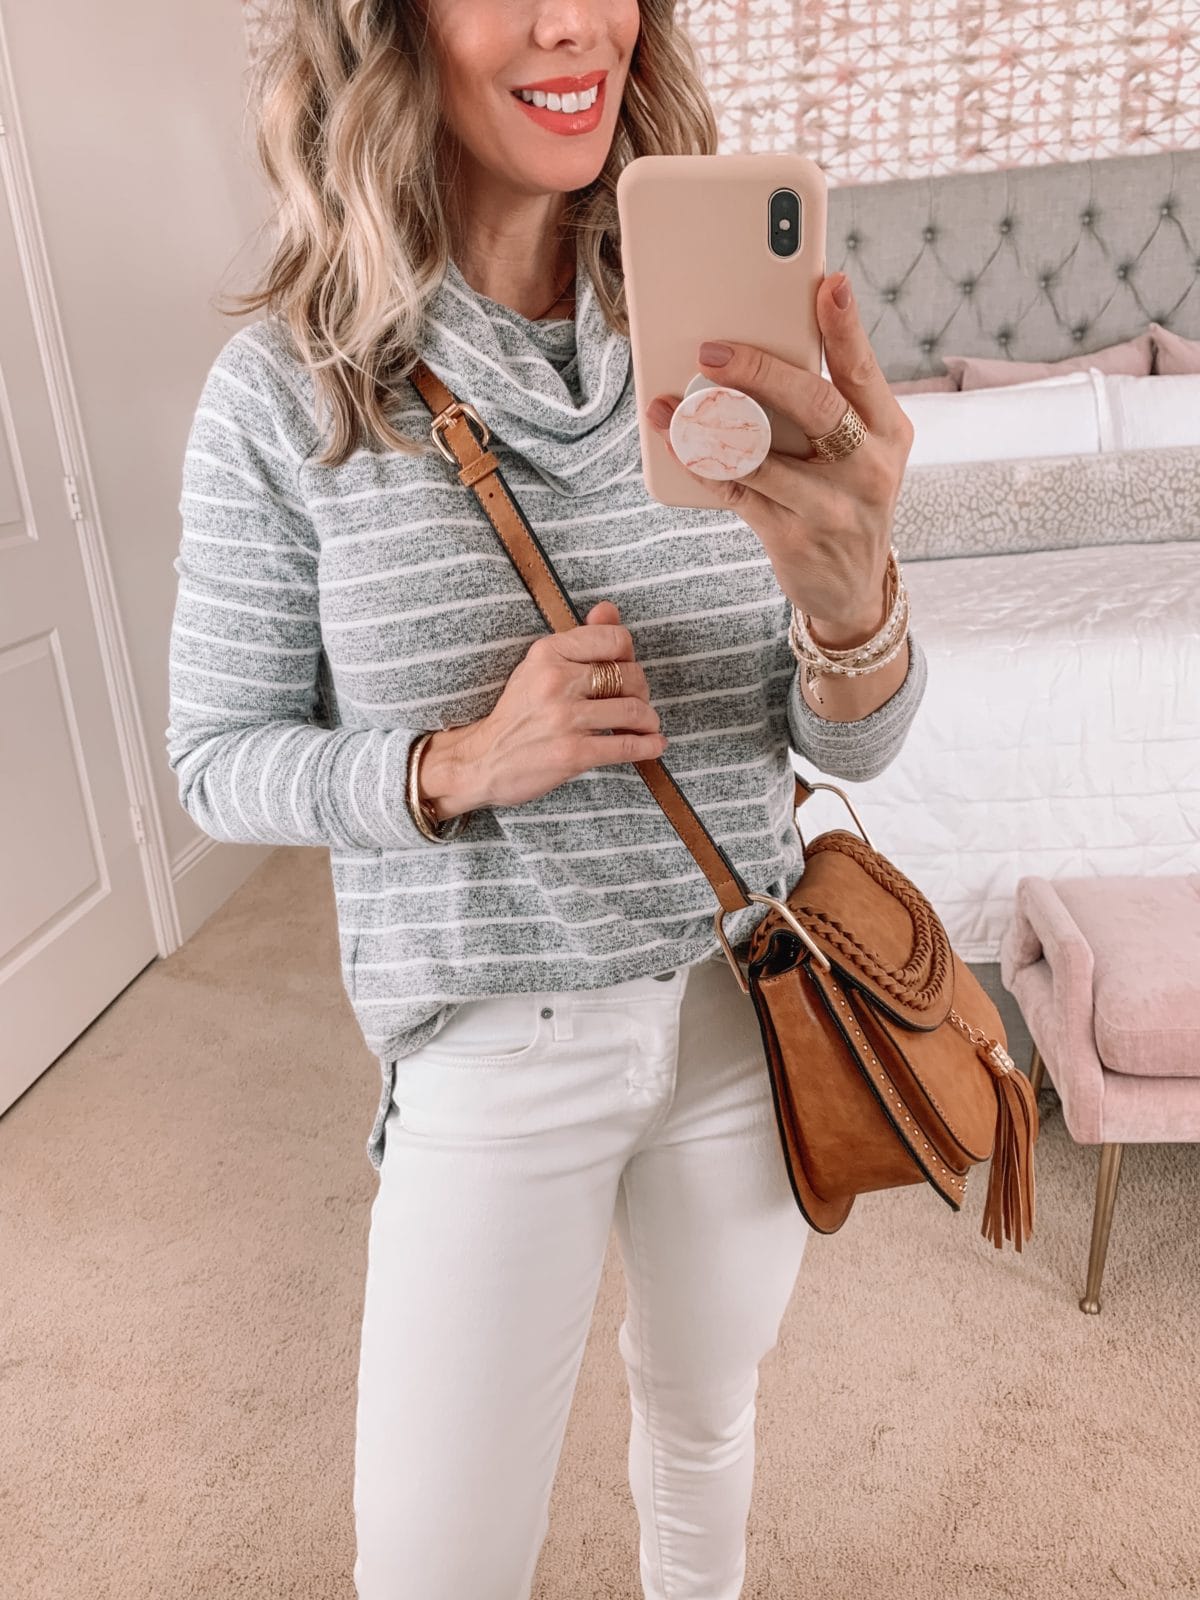 Amazon Fashion Faves, Greay Striped Tunic with Cowl Neck, Jeans, Crossbody 